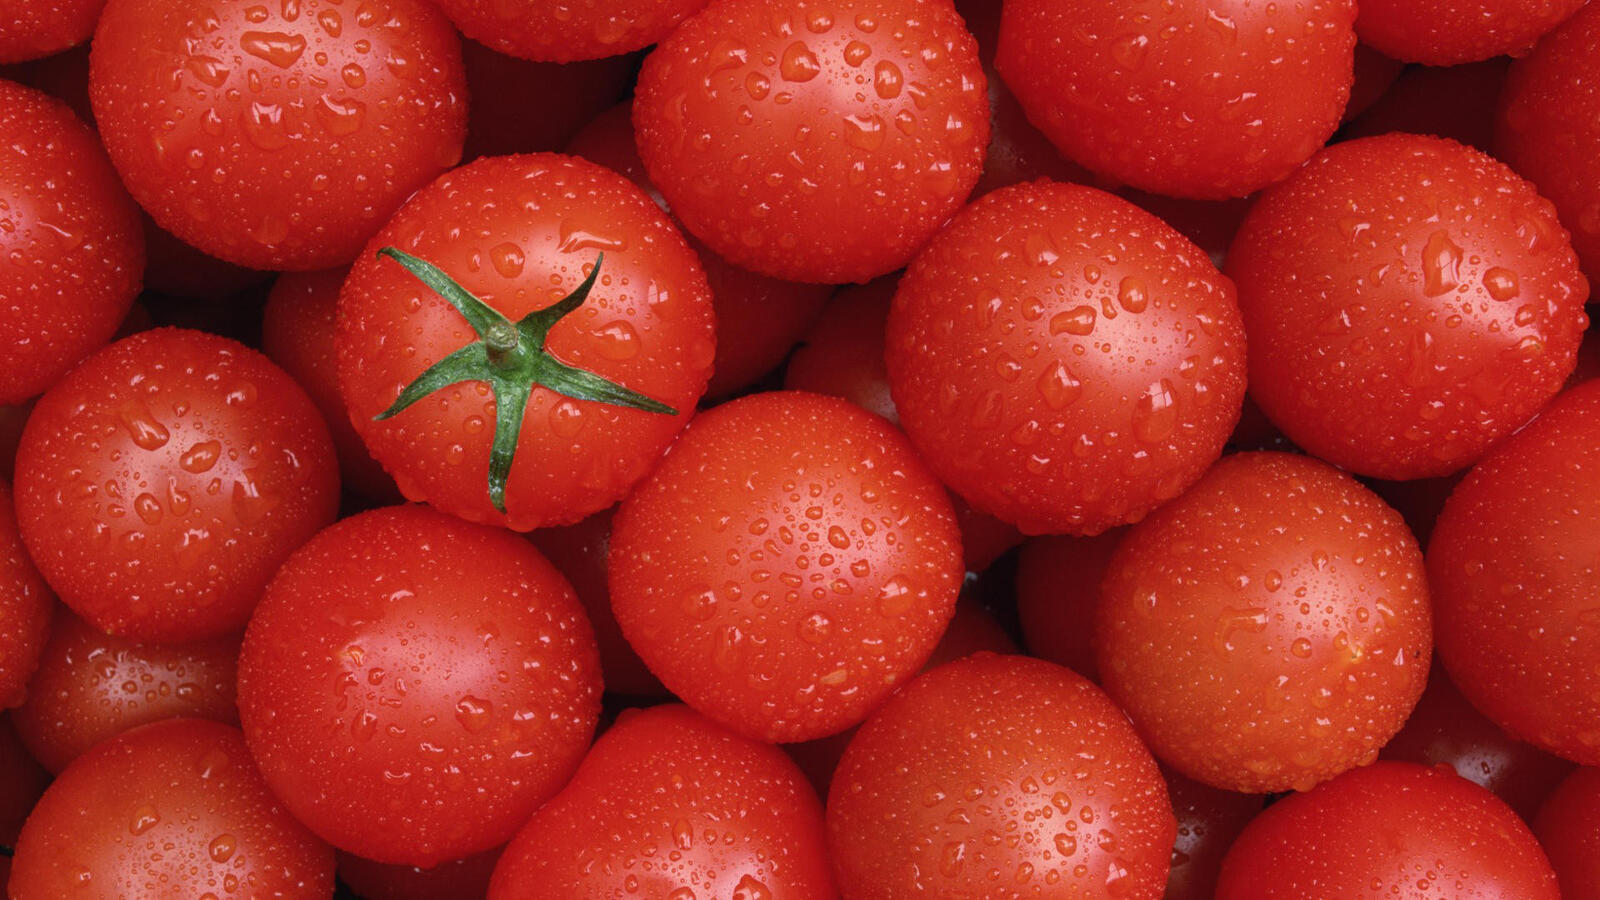 Wallpapers tomatoes cherry red on the desktop